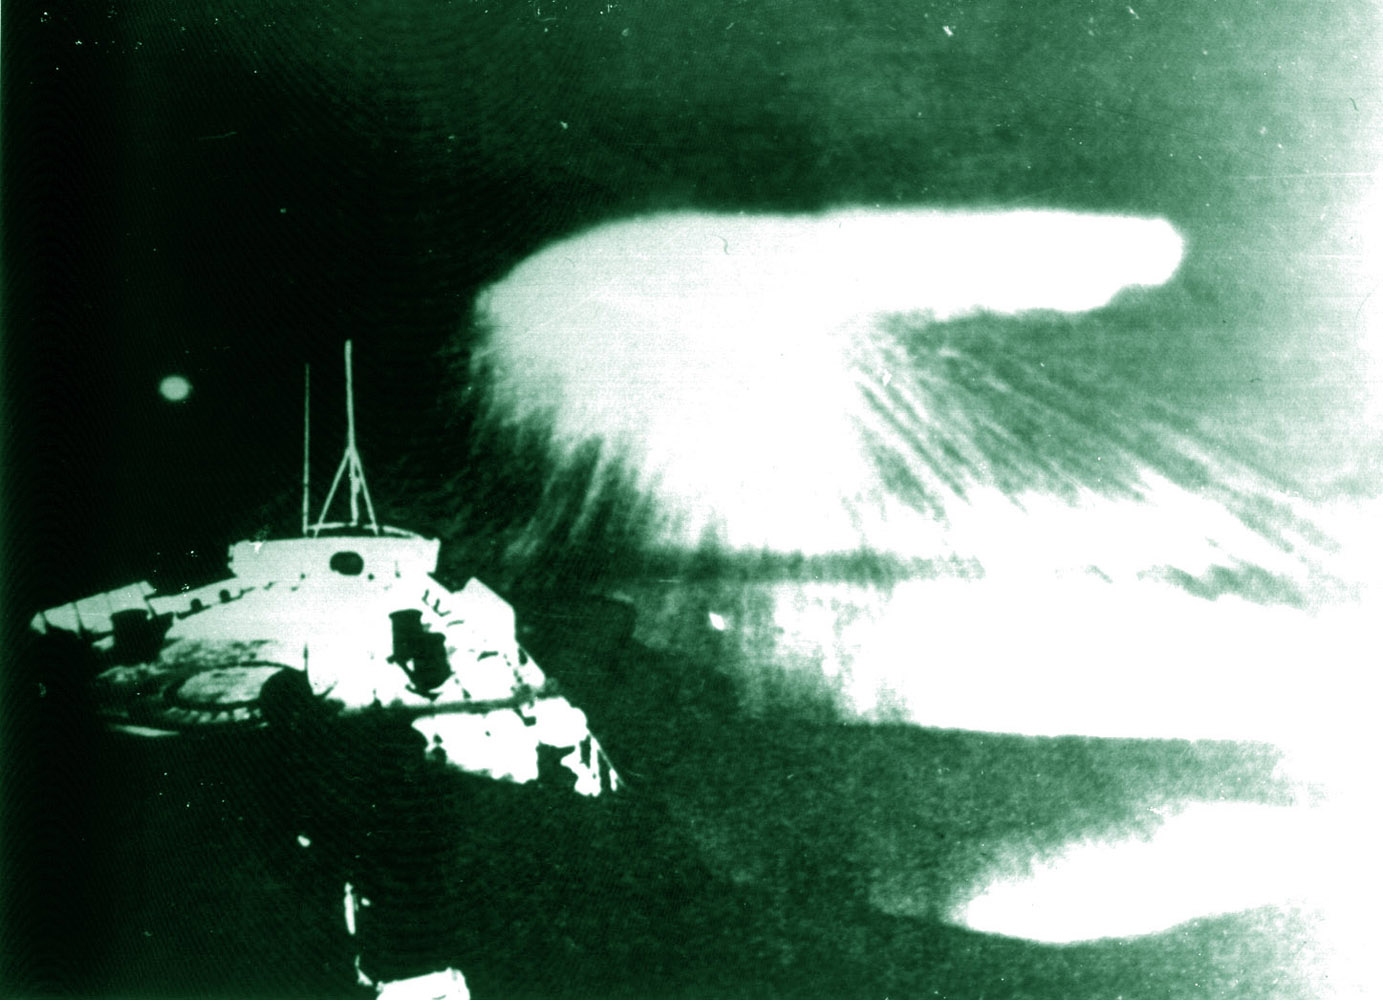 The departure of a disc-shaped UFO from the water in front of the ship. The Black Sea, May 1979.